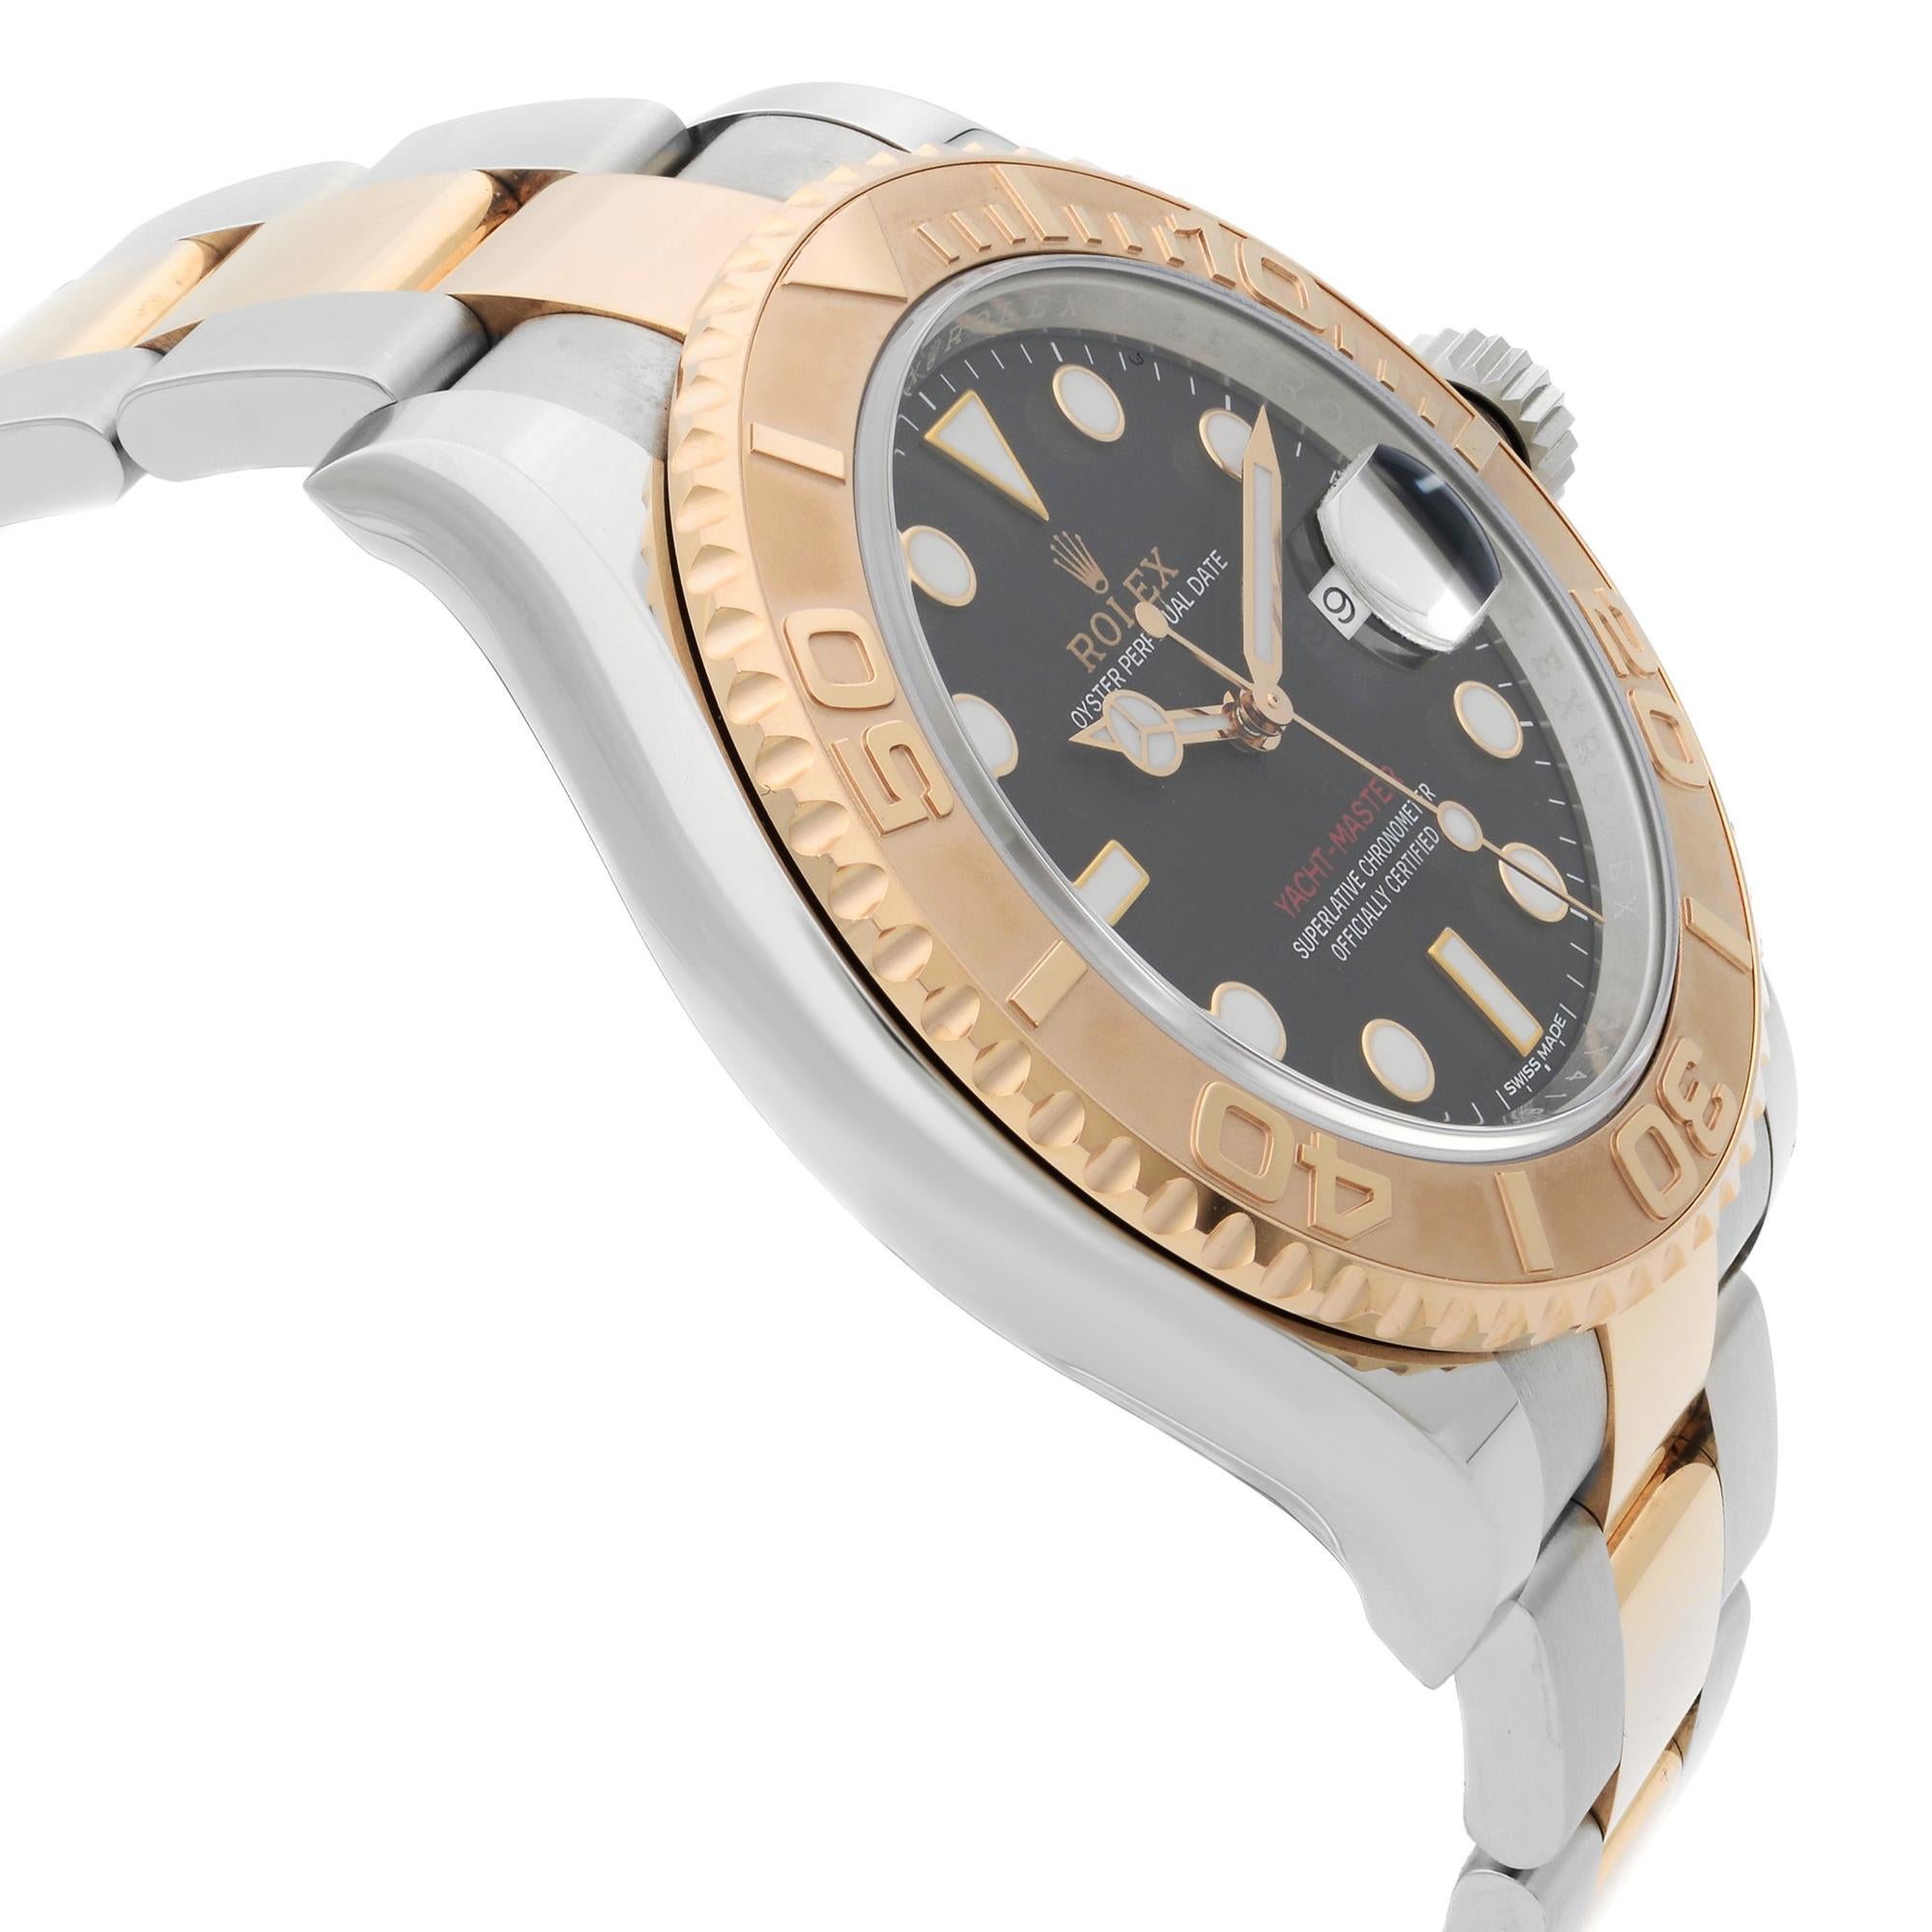 yachtmaster bicolor